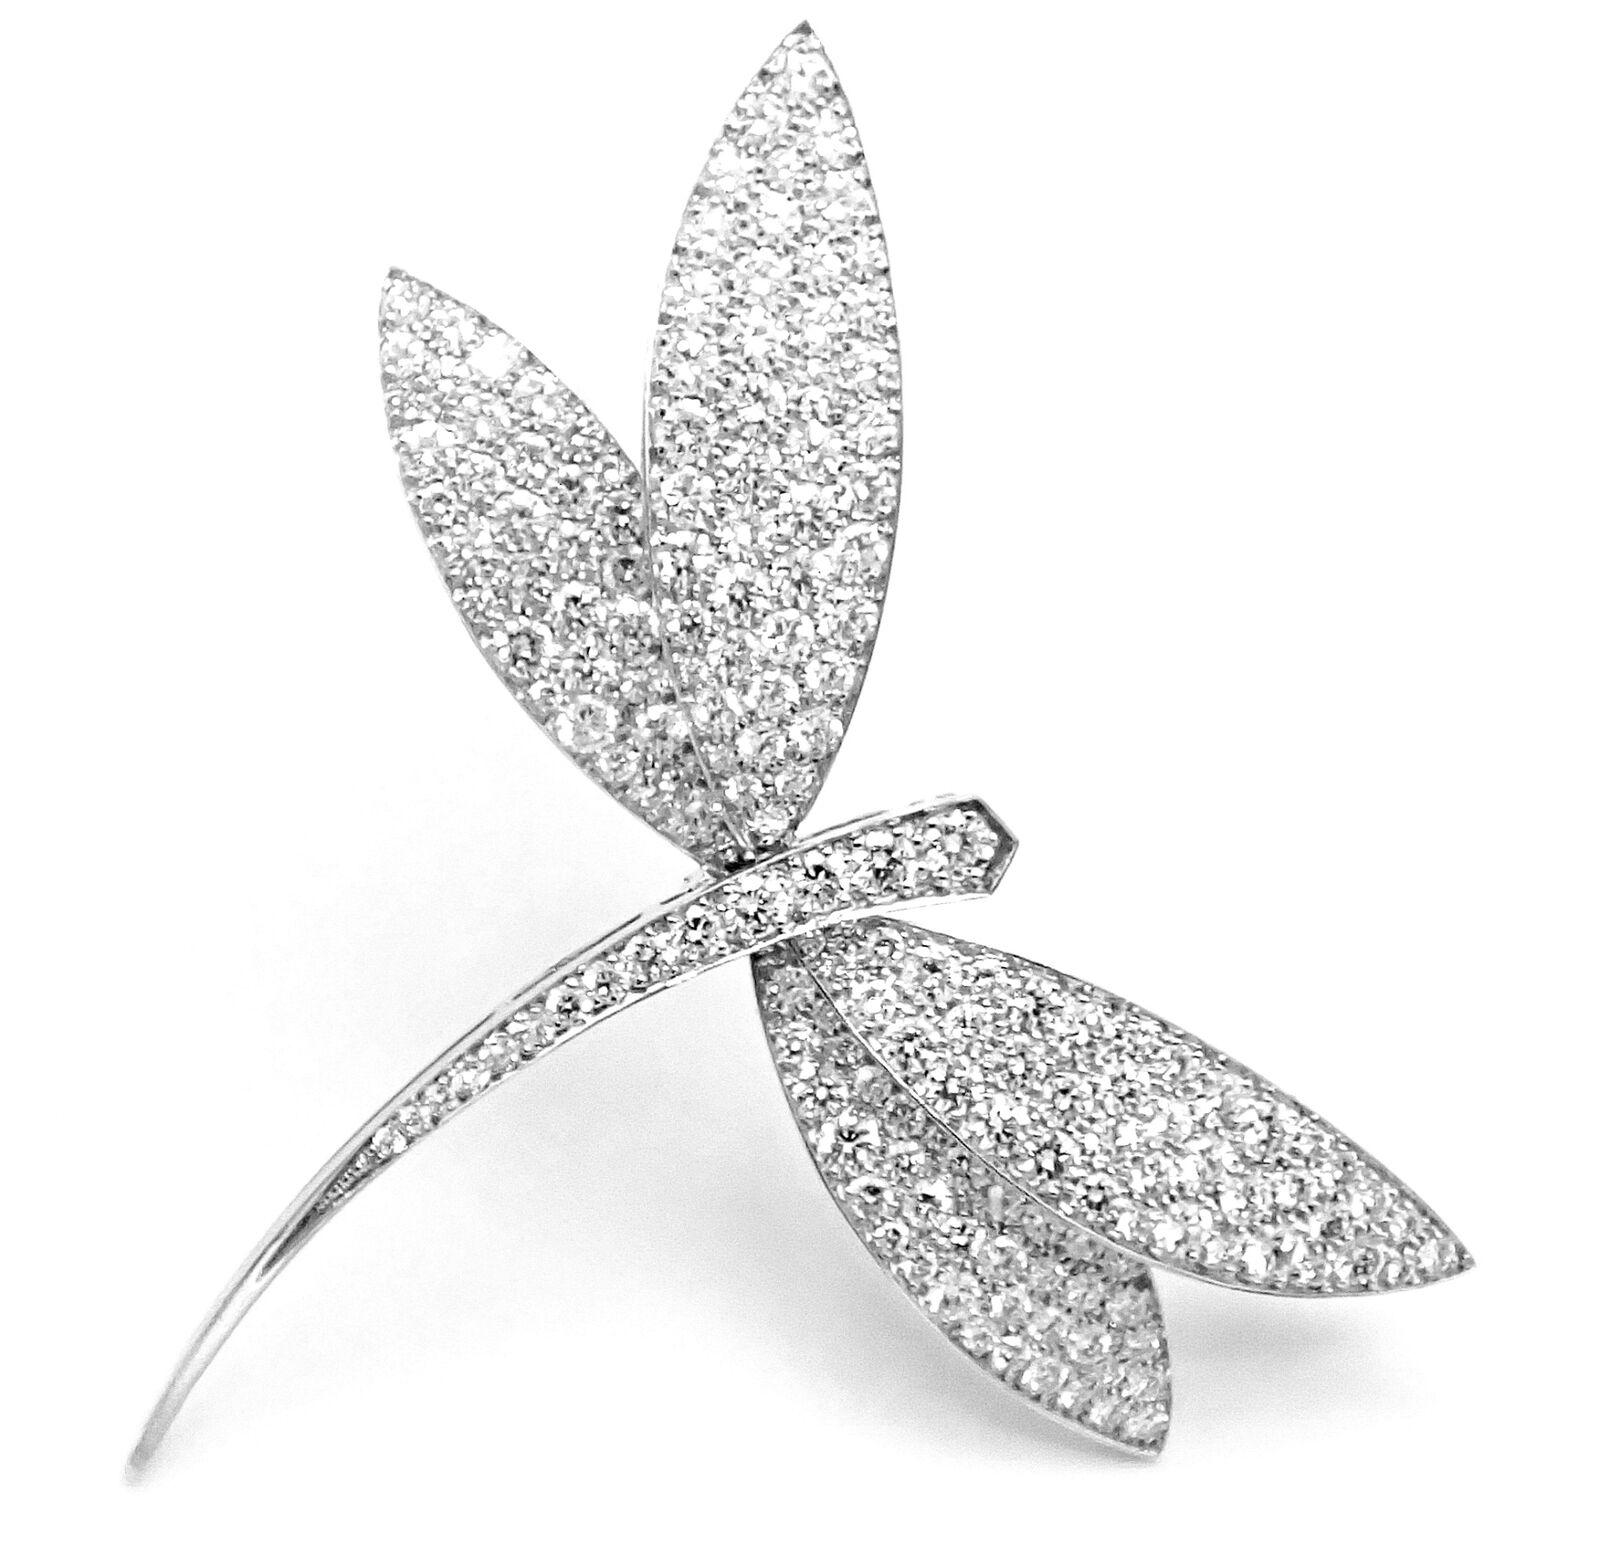 18k White Gold Diamond Large Dragonfly Brooch Pin by Van Cleef & Arpels. 
With Round brilliant cut diamonds VVS1 clarity, E color total weight approximately 6ct
Details: 
Weight: 16 grams
Measurements: 55mm x 61mm
Stamped Hallmarks: Van Cleef &